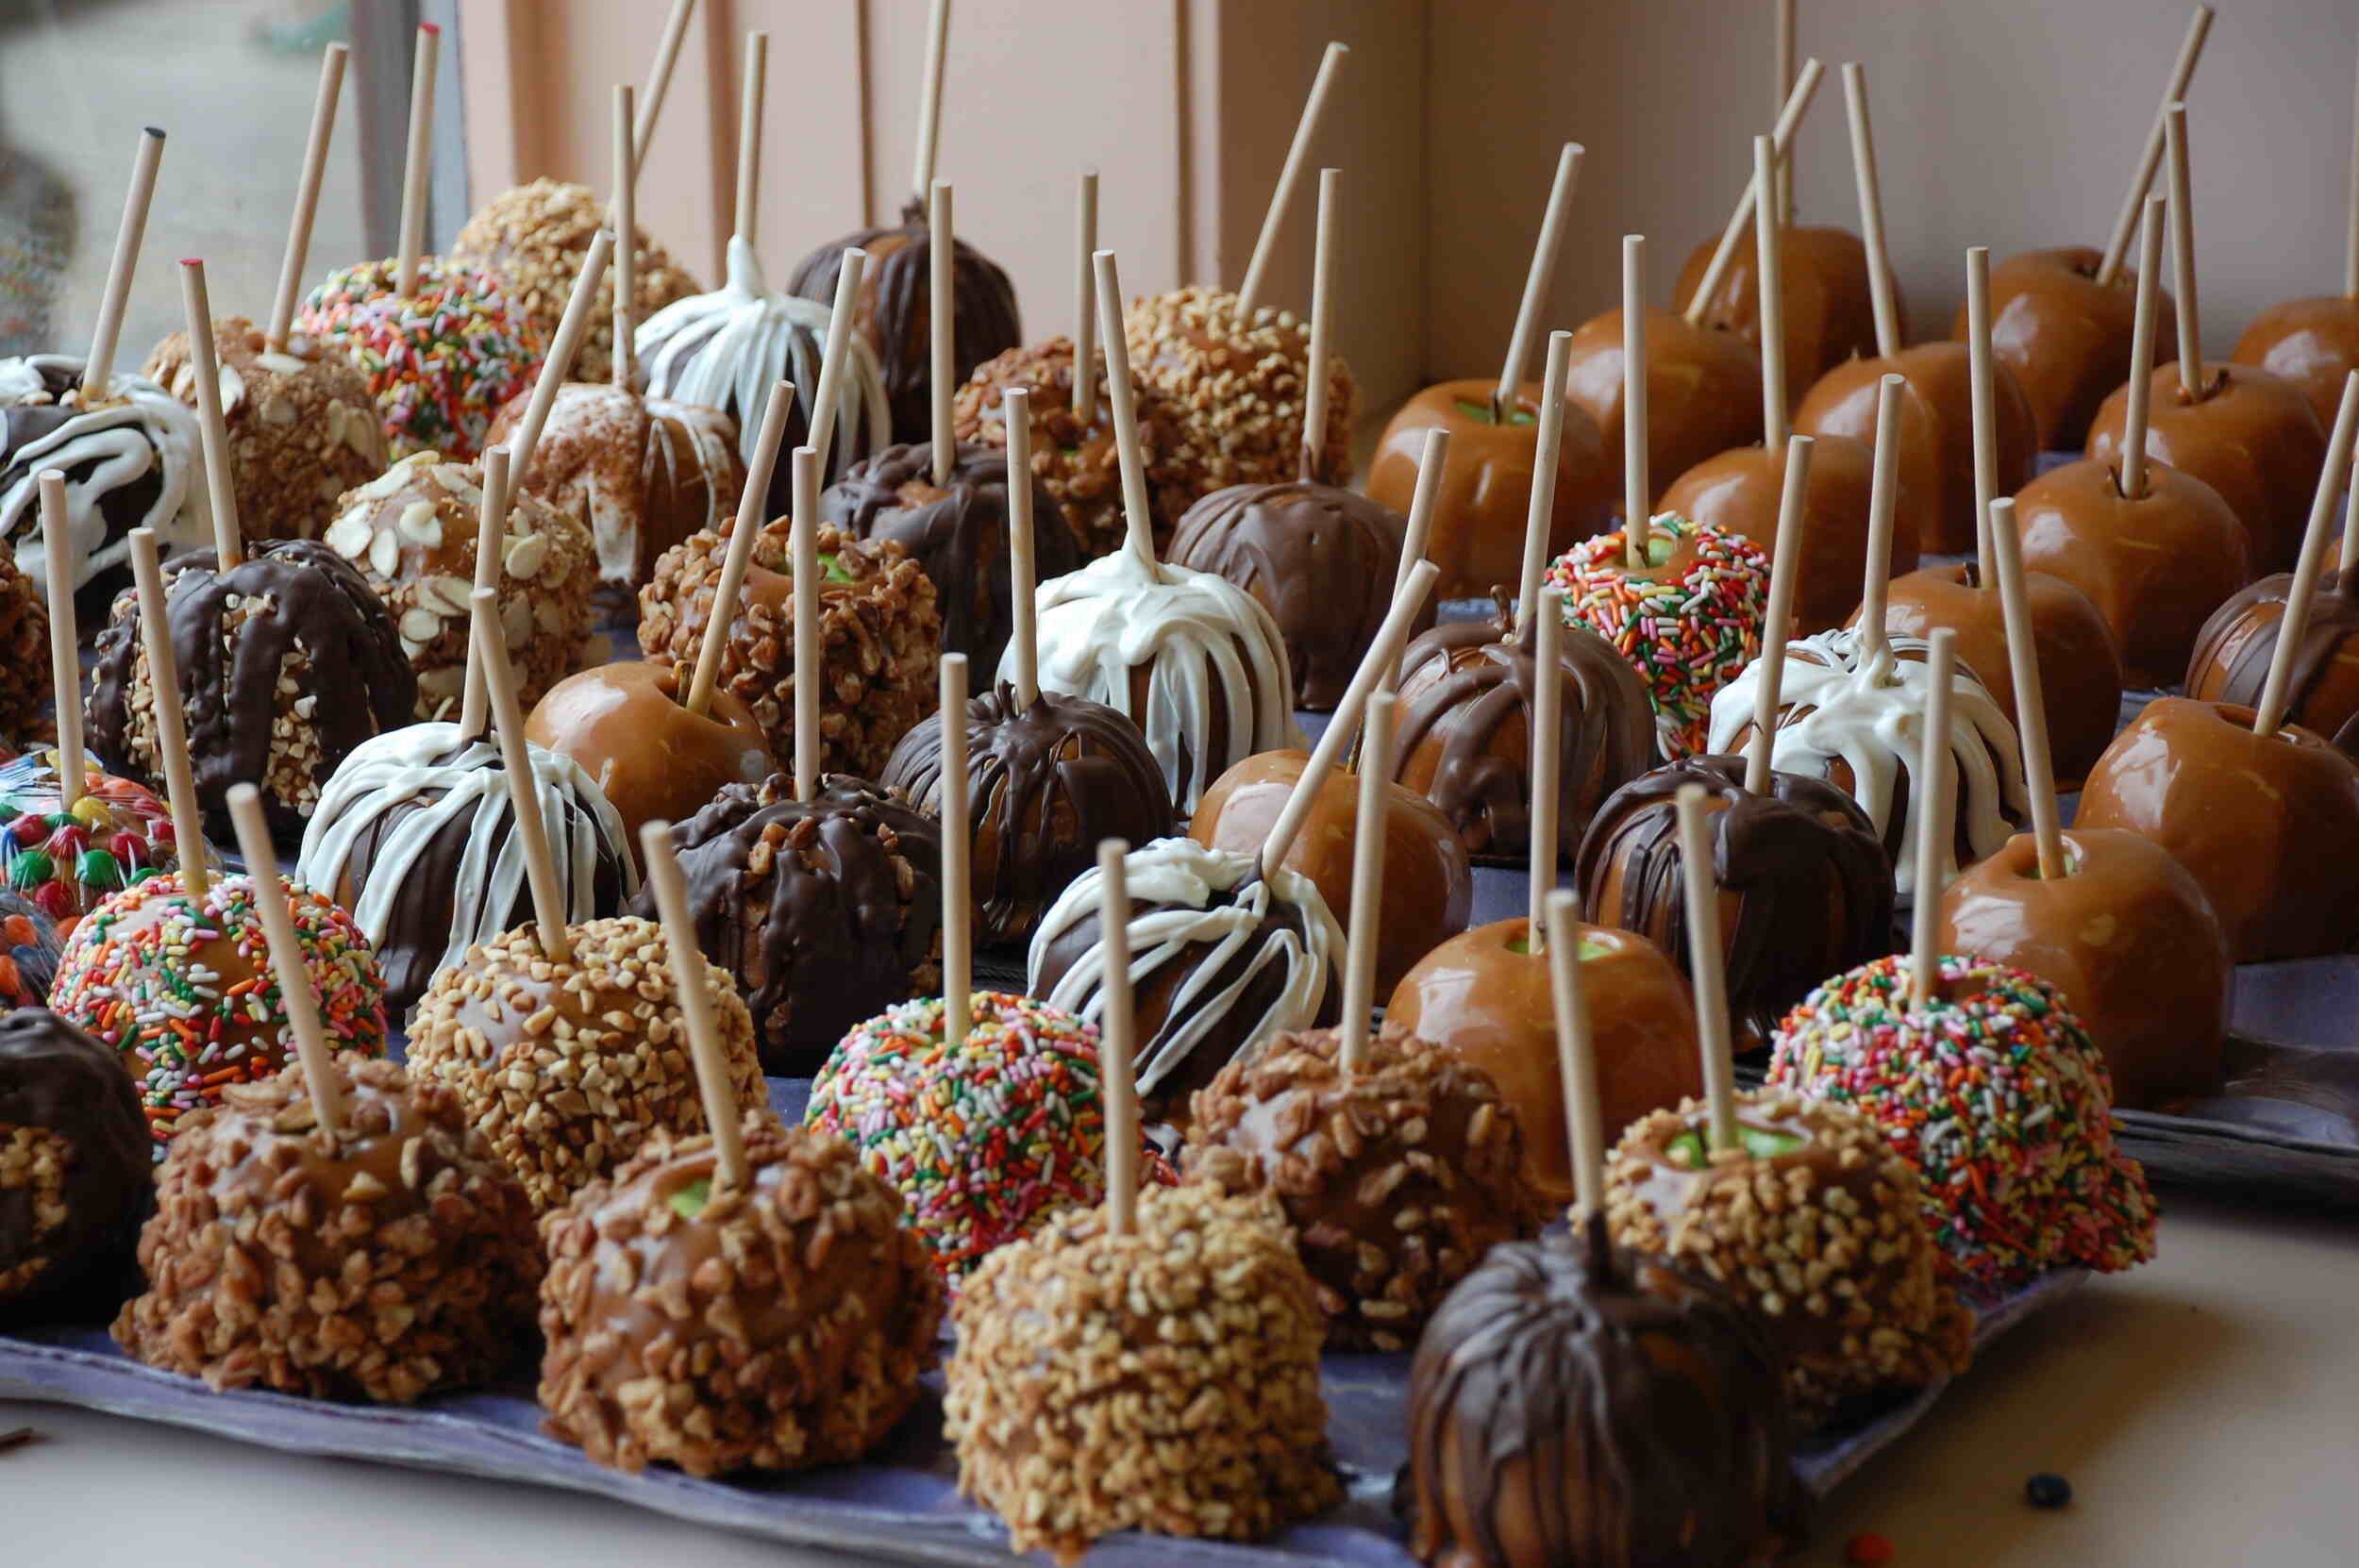 How To Store Chocolate Covered Apples